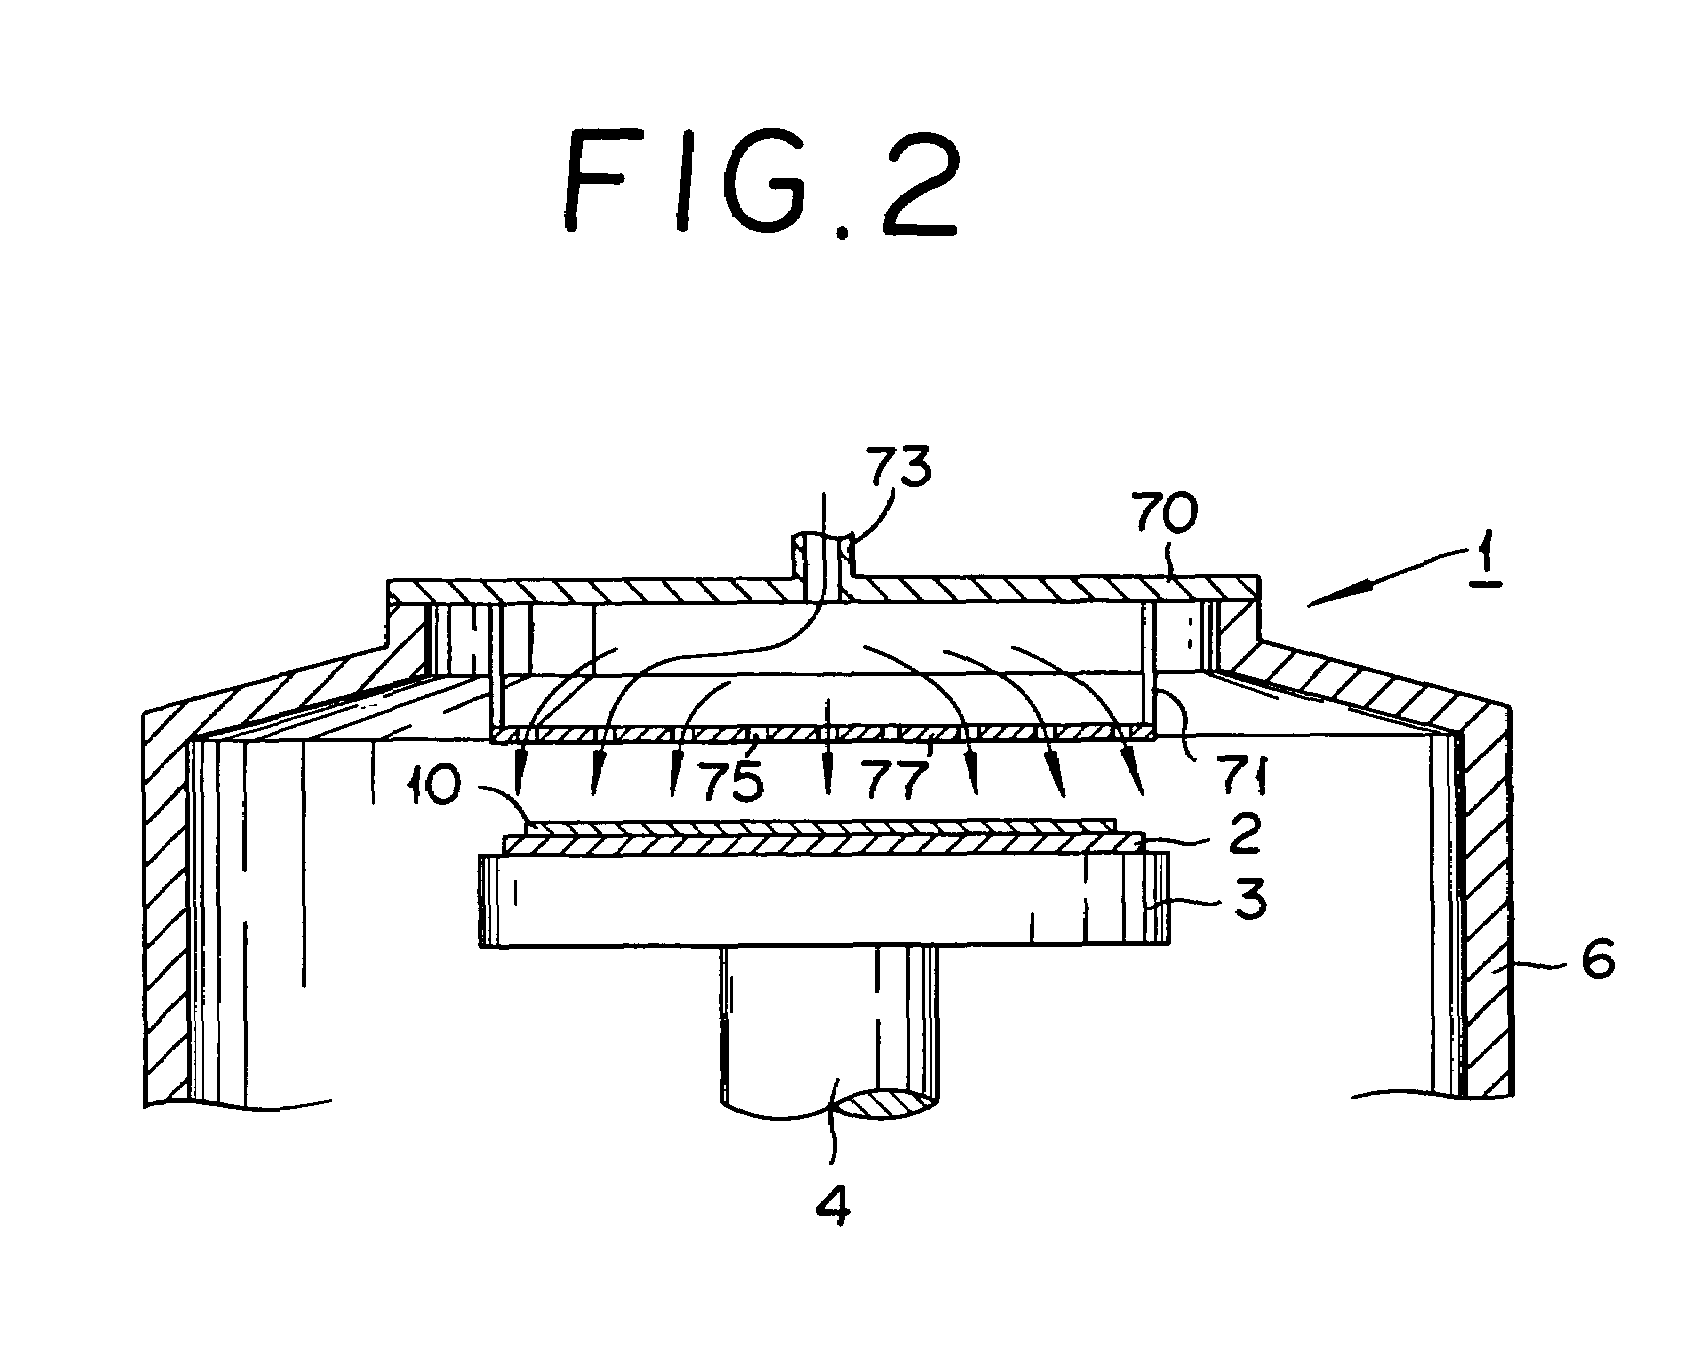 Method and apparatus for production of fluorine-containing polyimide film